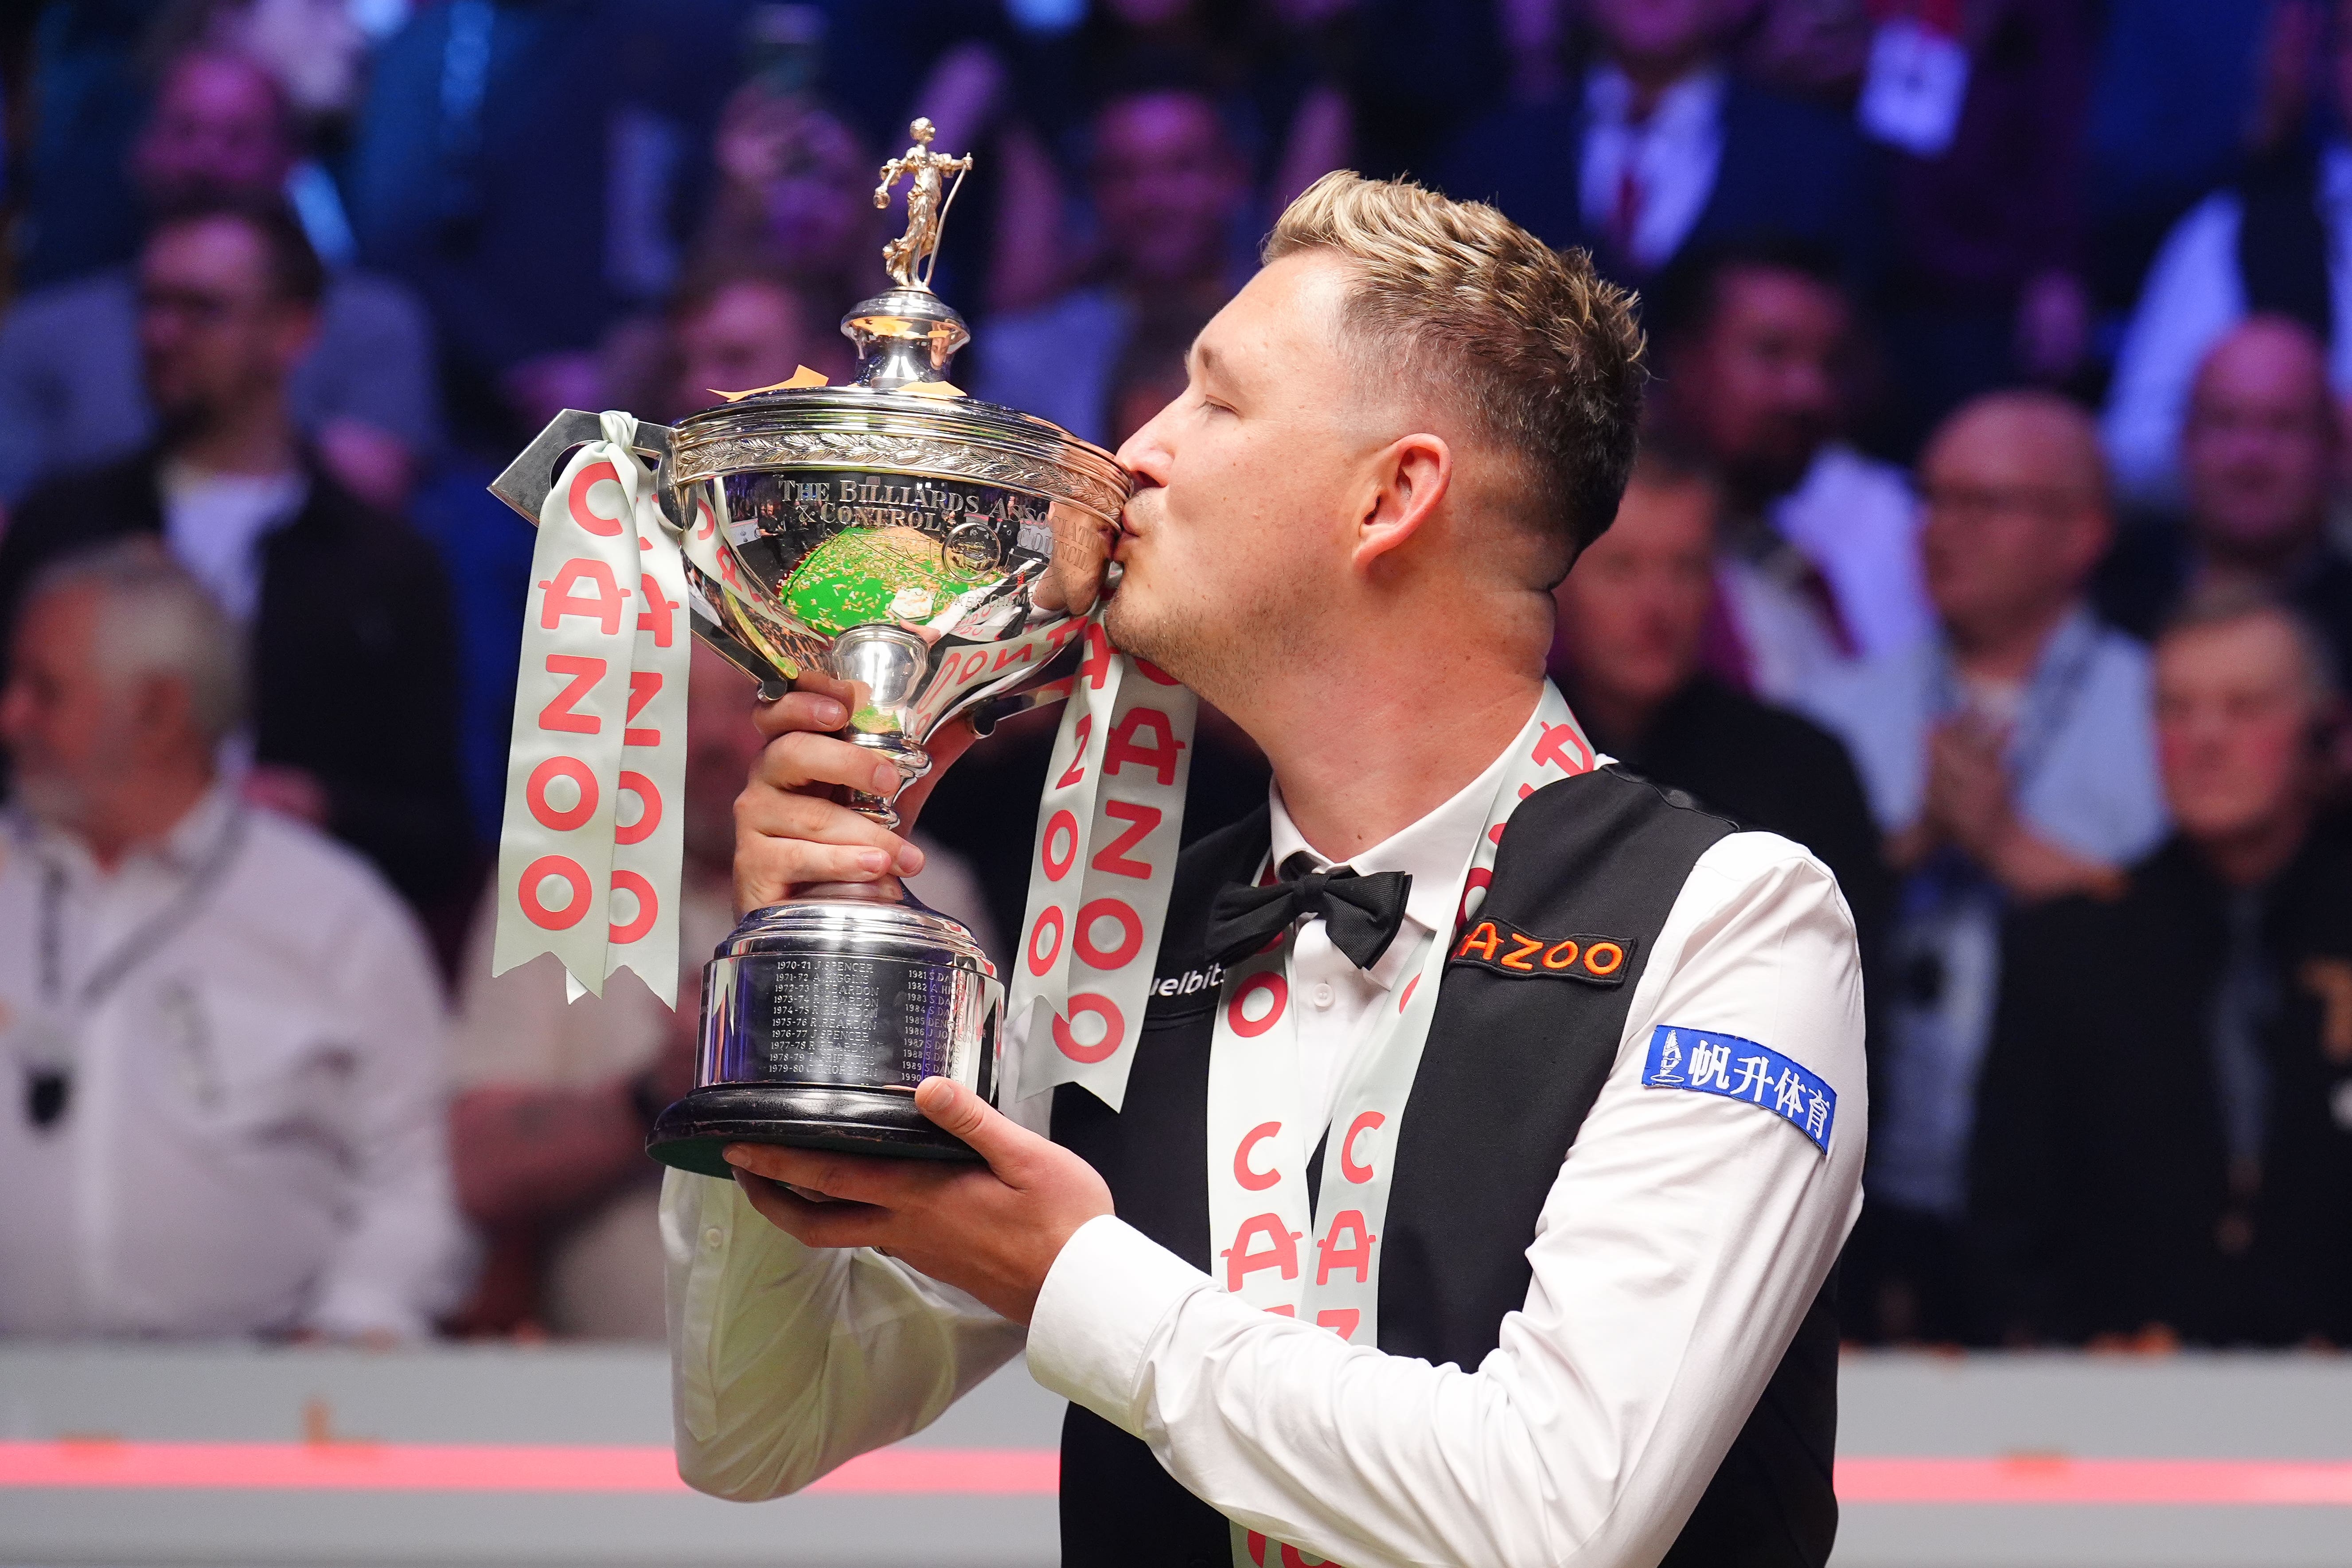 Wilson celebrates with the trophy after winning the world snooker title